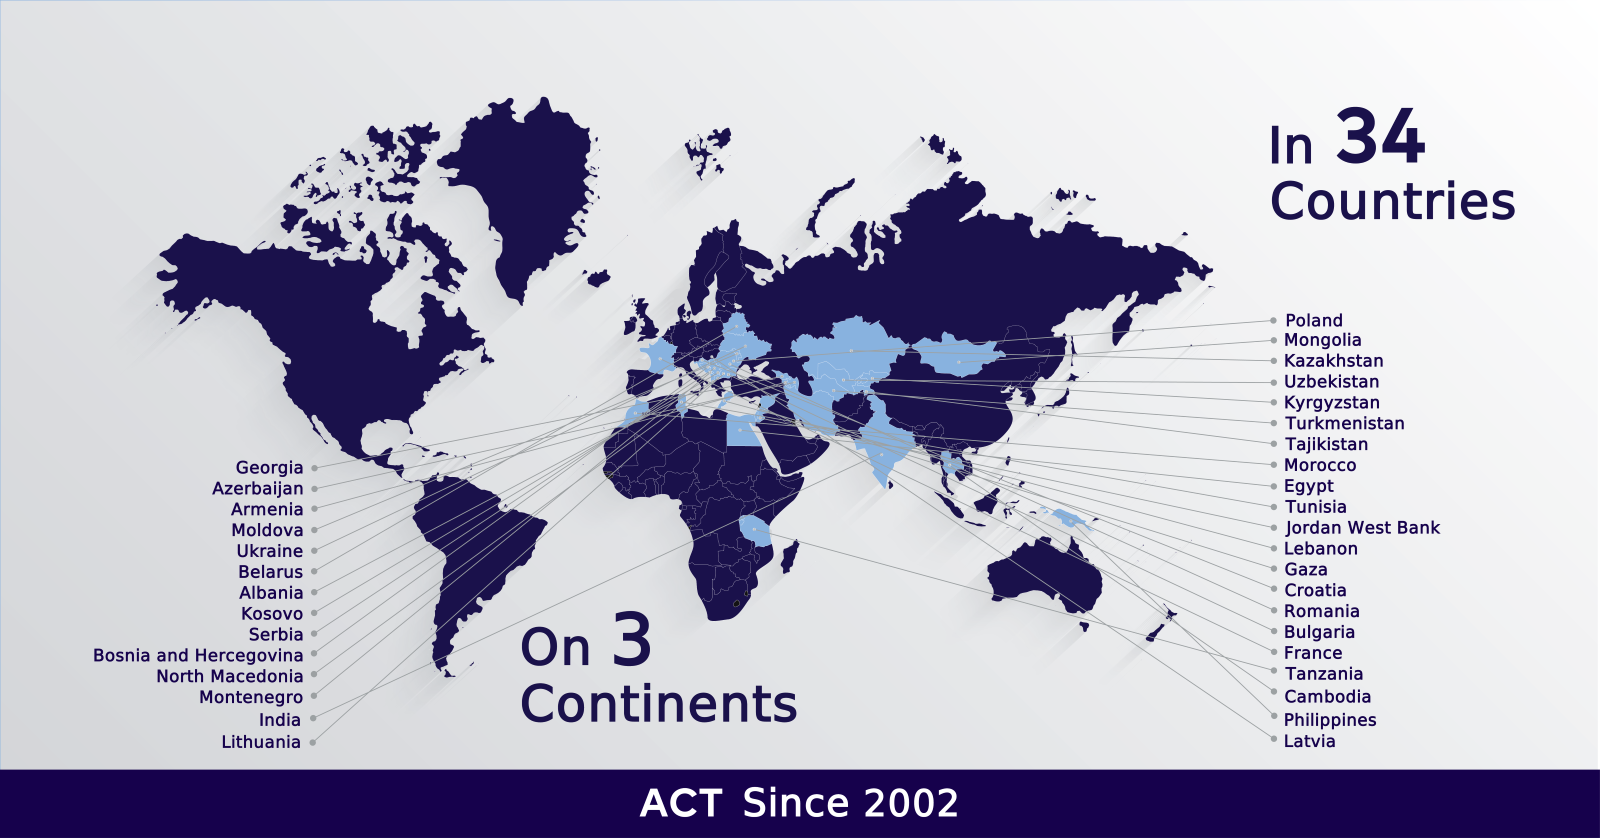 Three new countries on the international map of ACT projects